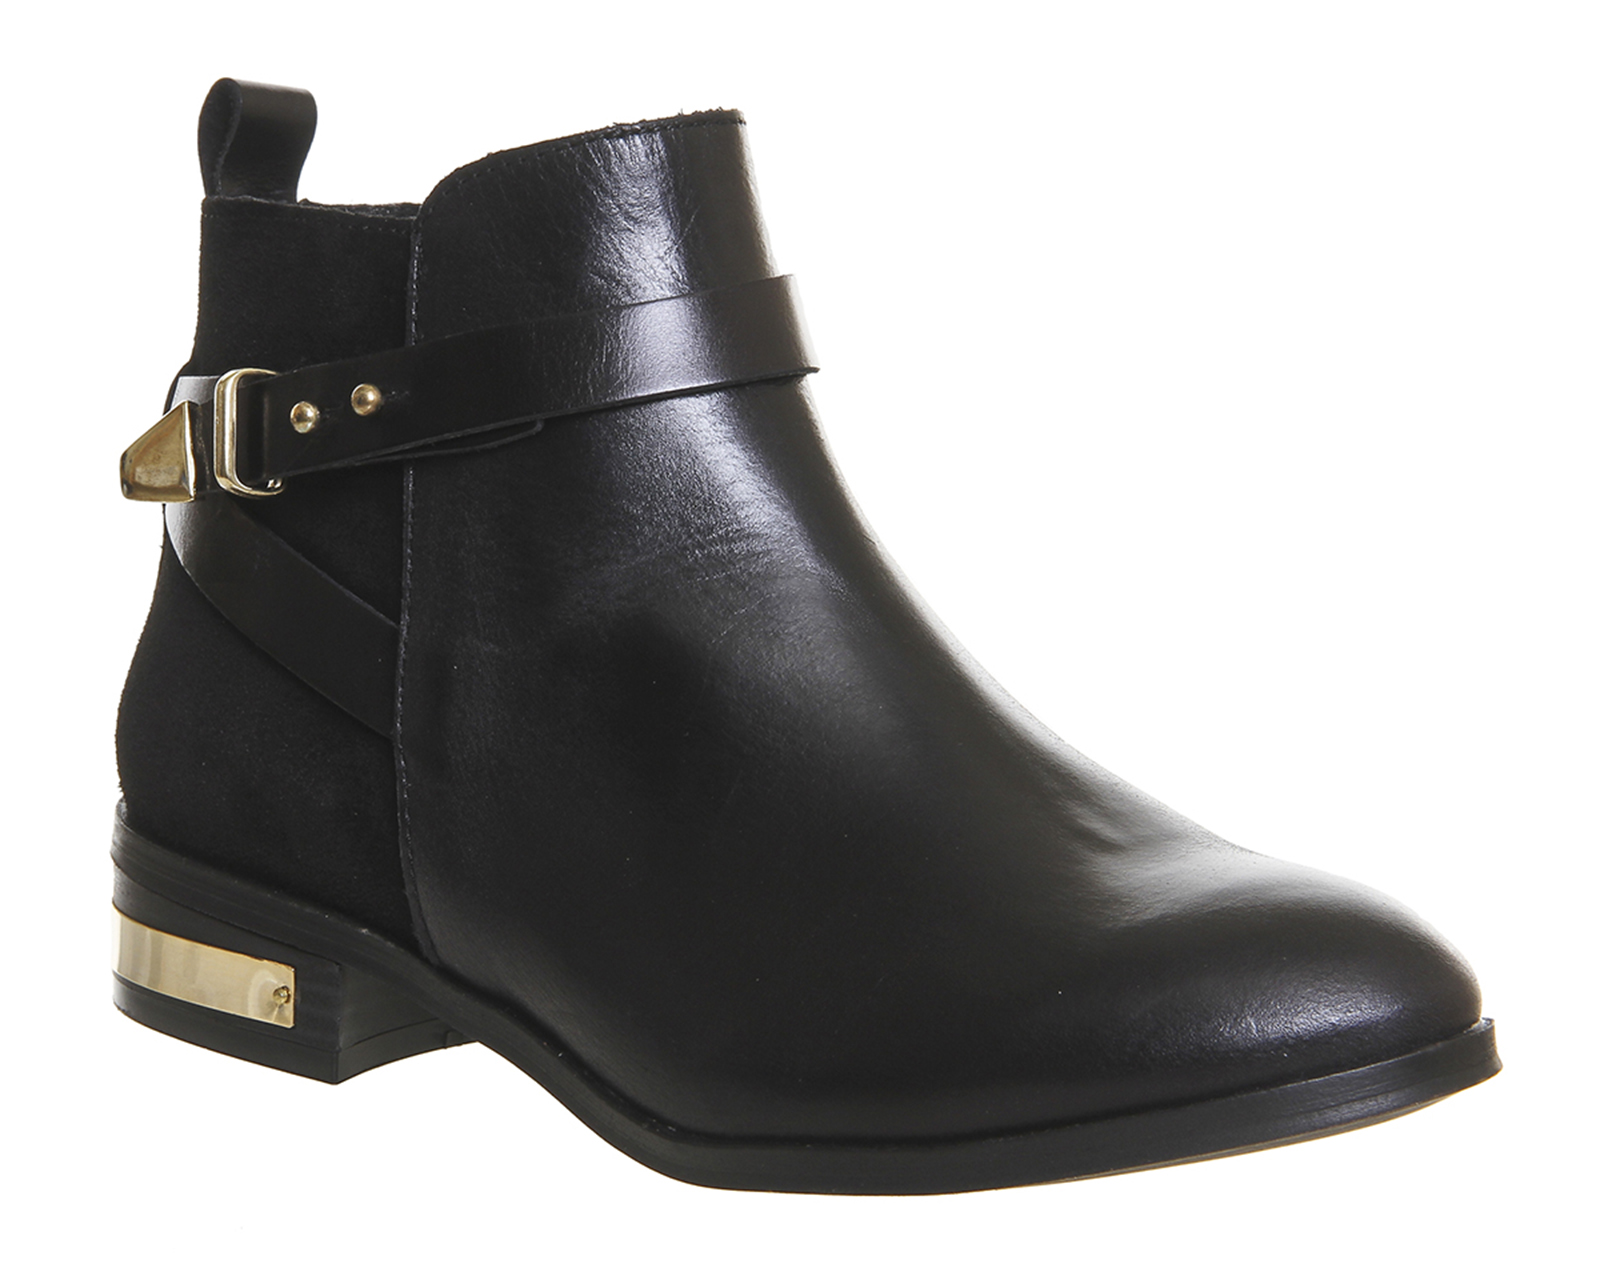 OFFICEInstinct Ankle Boot With TrimShiny Black Leather